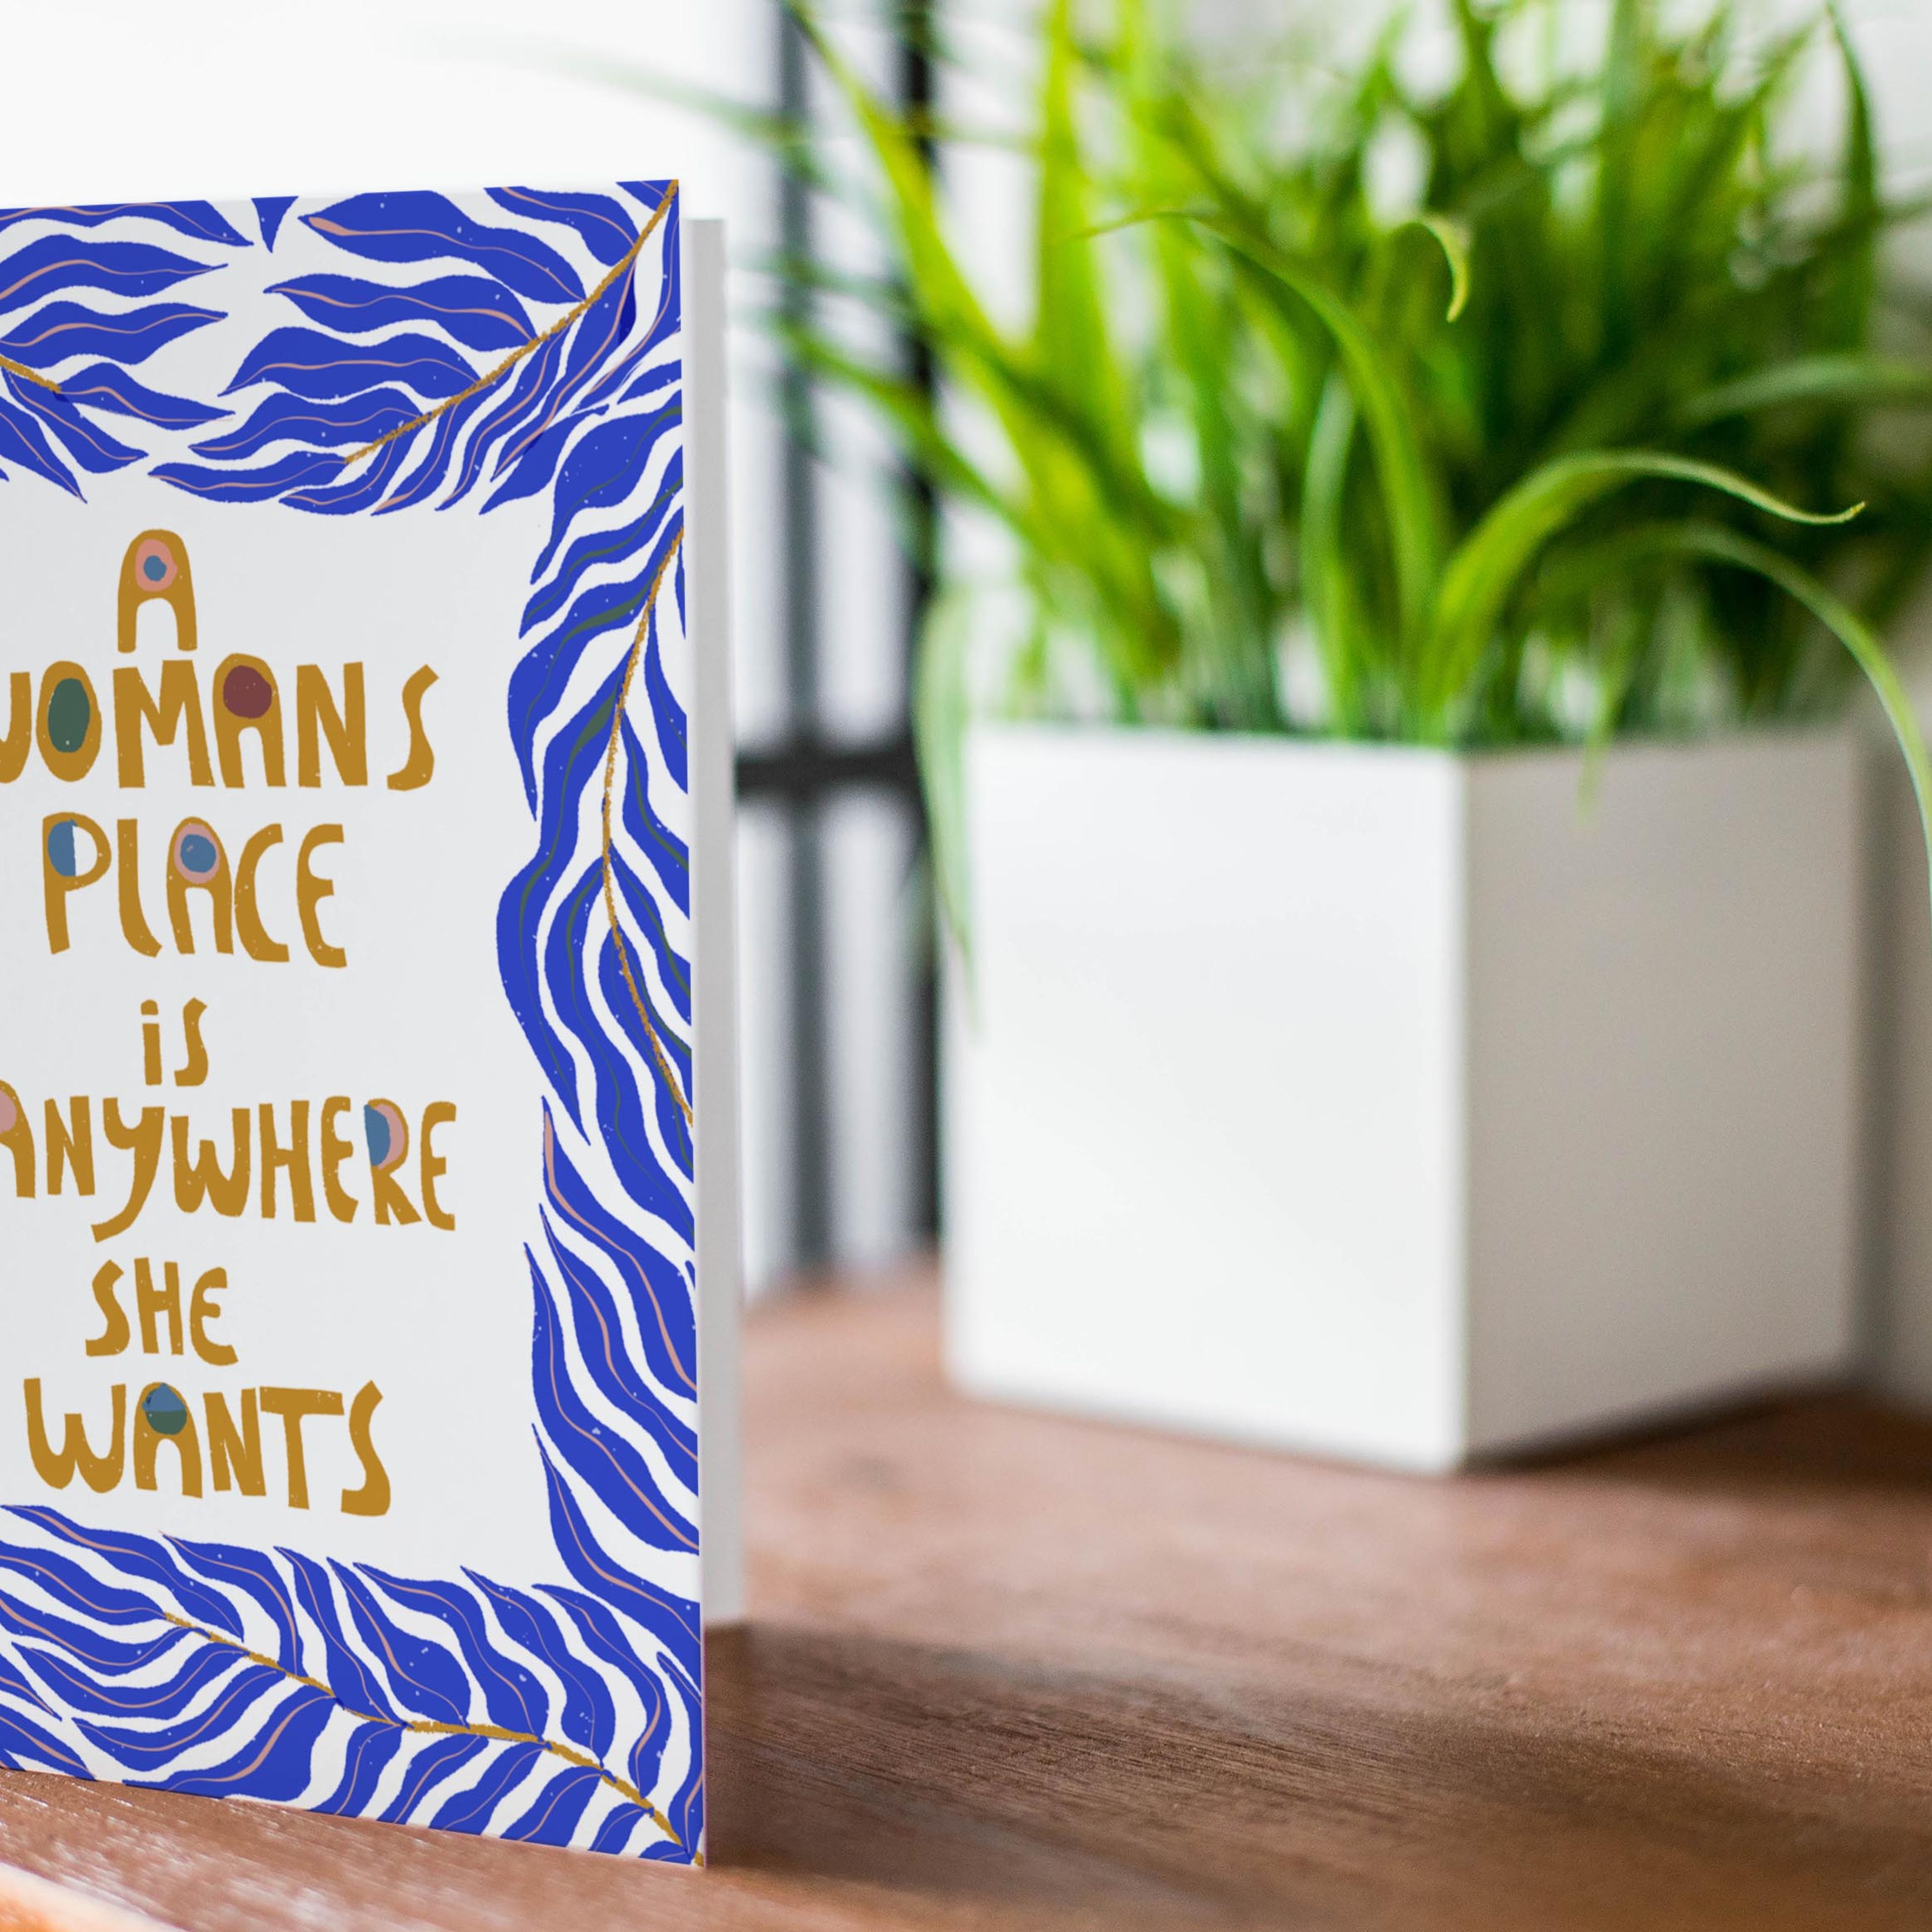 A Women's Place is Anywhere she Wants Greeting Card